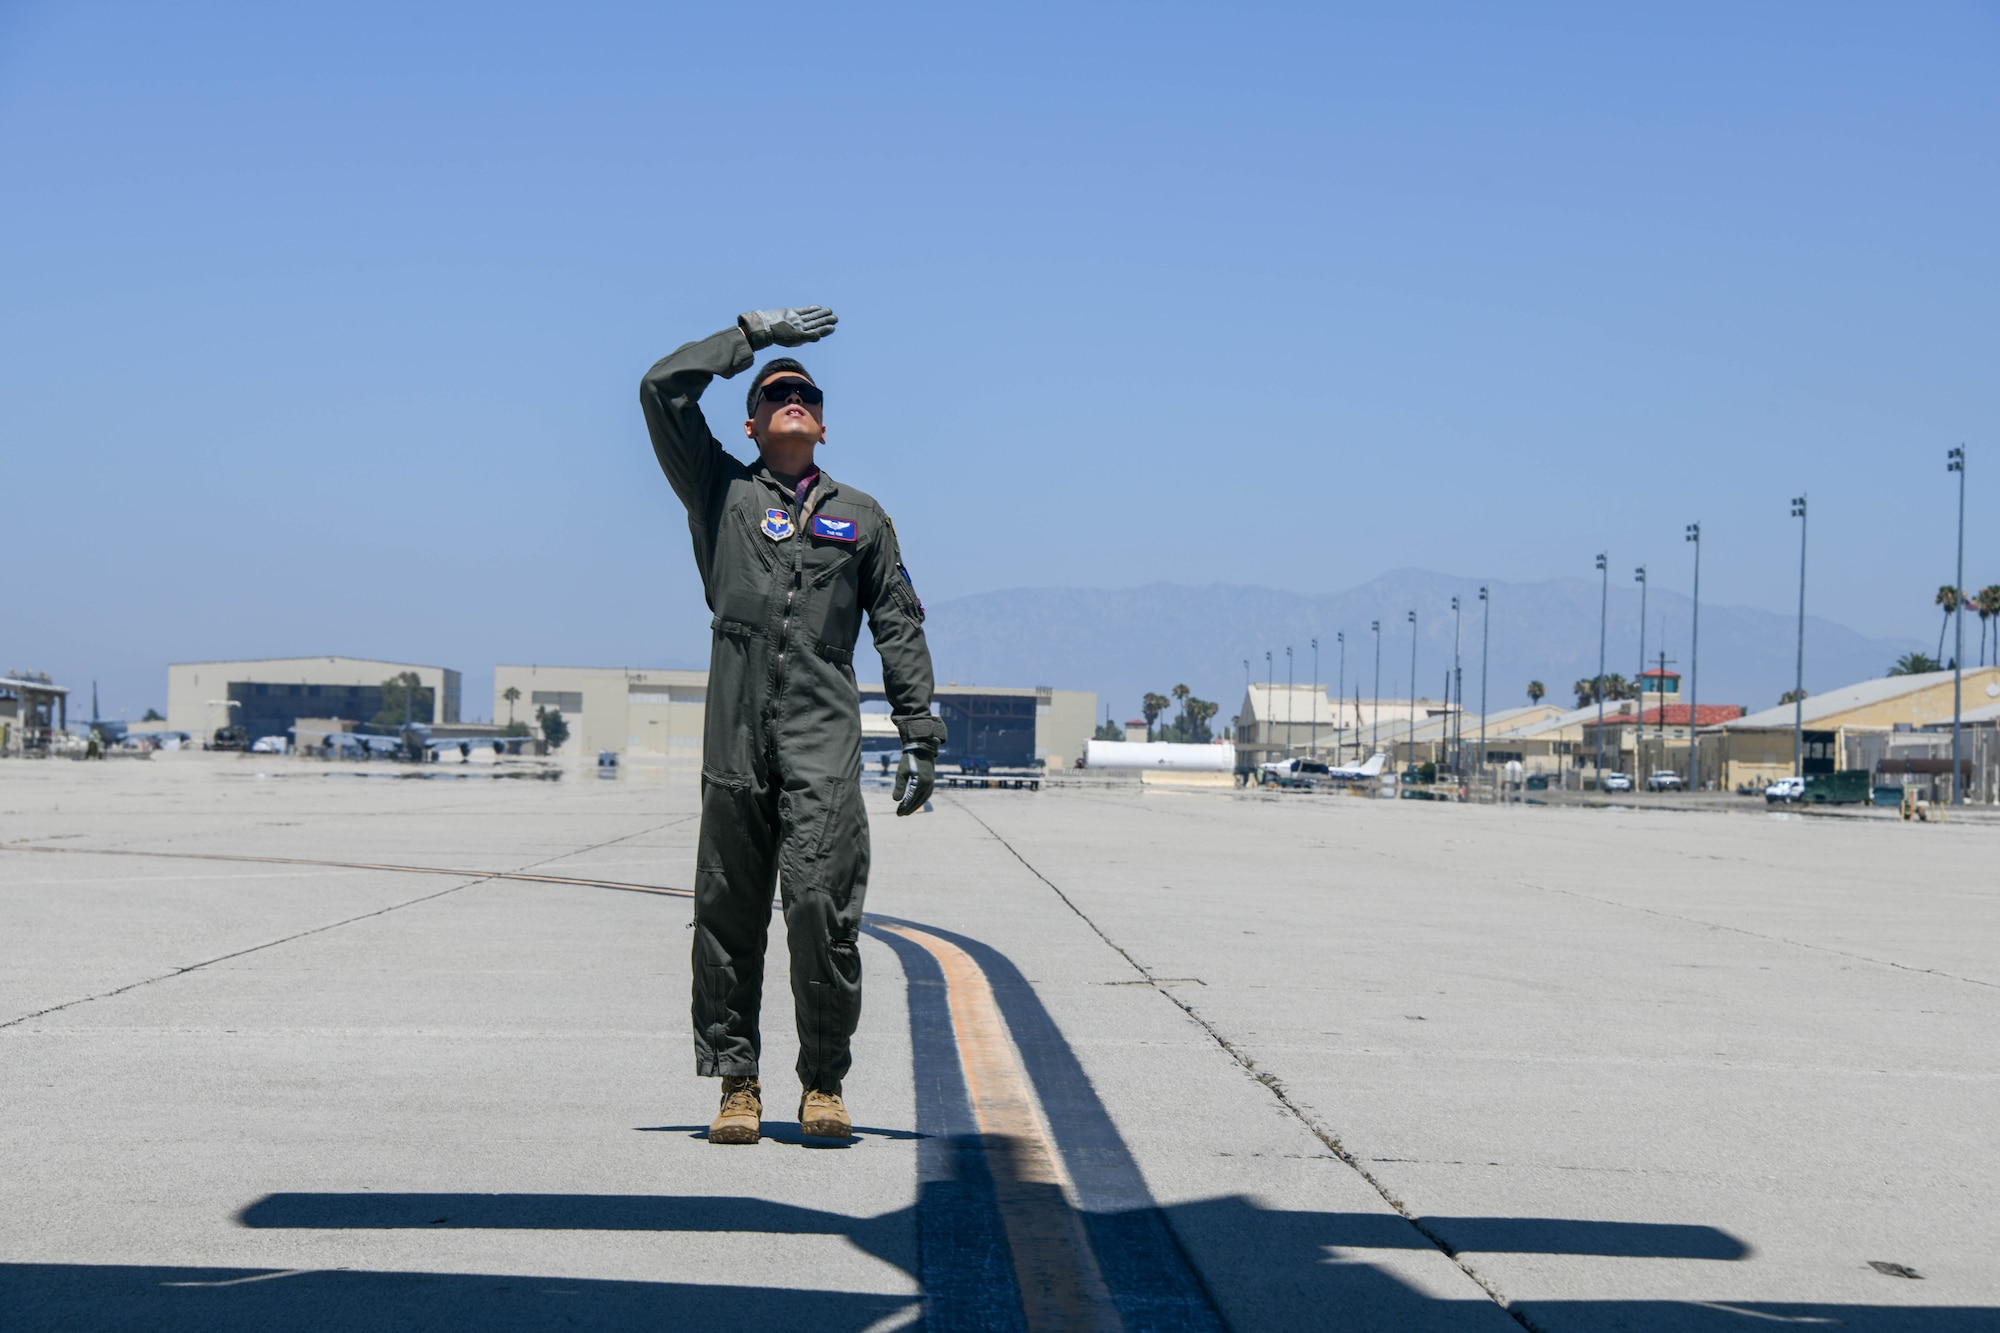 U.S. Air Force Capt. Tae Kim, an instructor pilot from the 54th Air Refueling Squadron (ARS) at Altus Air Force Base (AFB), Oklahoma, performs a preflight check of a KC-135 Stratotanker at March Air Reserve Base, California, July 12, 2022. Airmen from the 54th ARS performed air refueling training with F-16 Fighter Falcons from the 310th Fighter Squadron at Luke AFB, Arizona. (U.S. Air Force photo by Airman 1st Class Trenton Jancze)